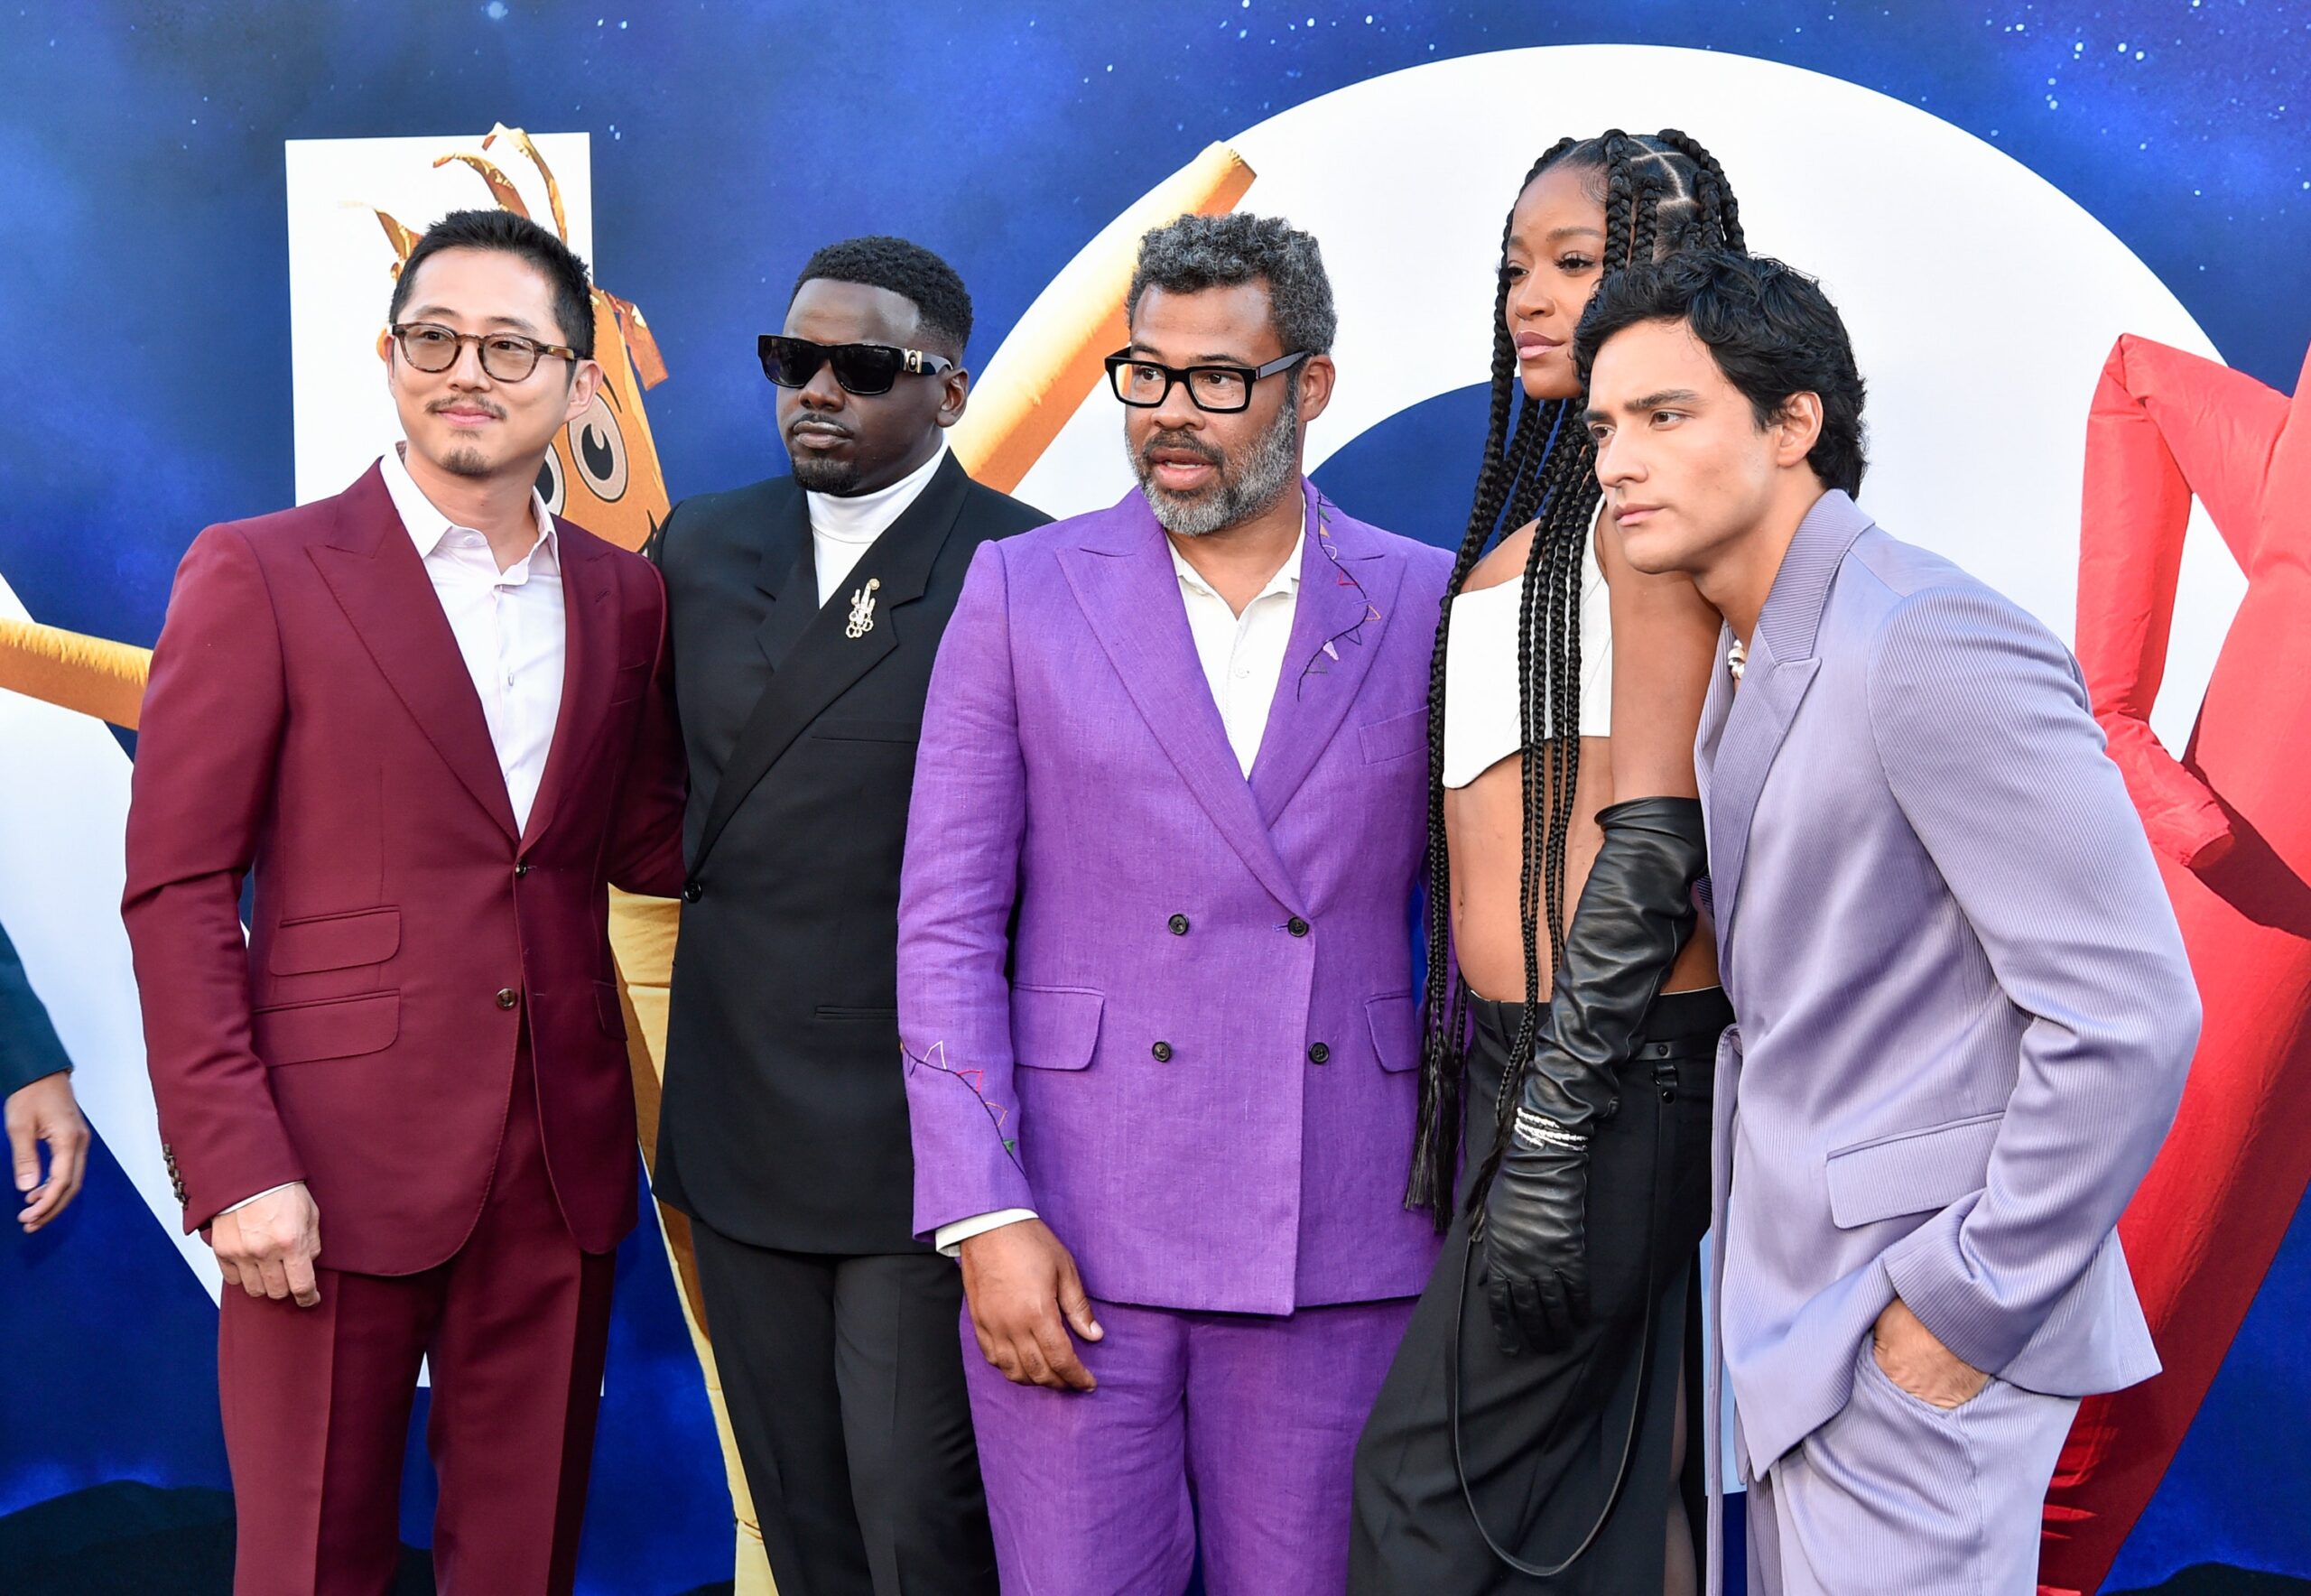 the-menswear-at-the-nope-movie-premiere?-more-like-yup